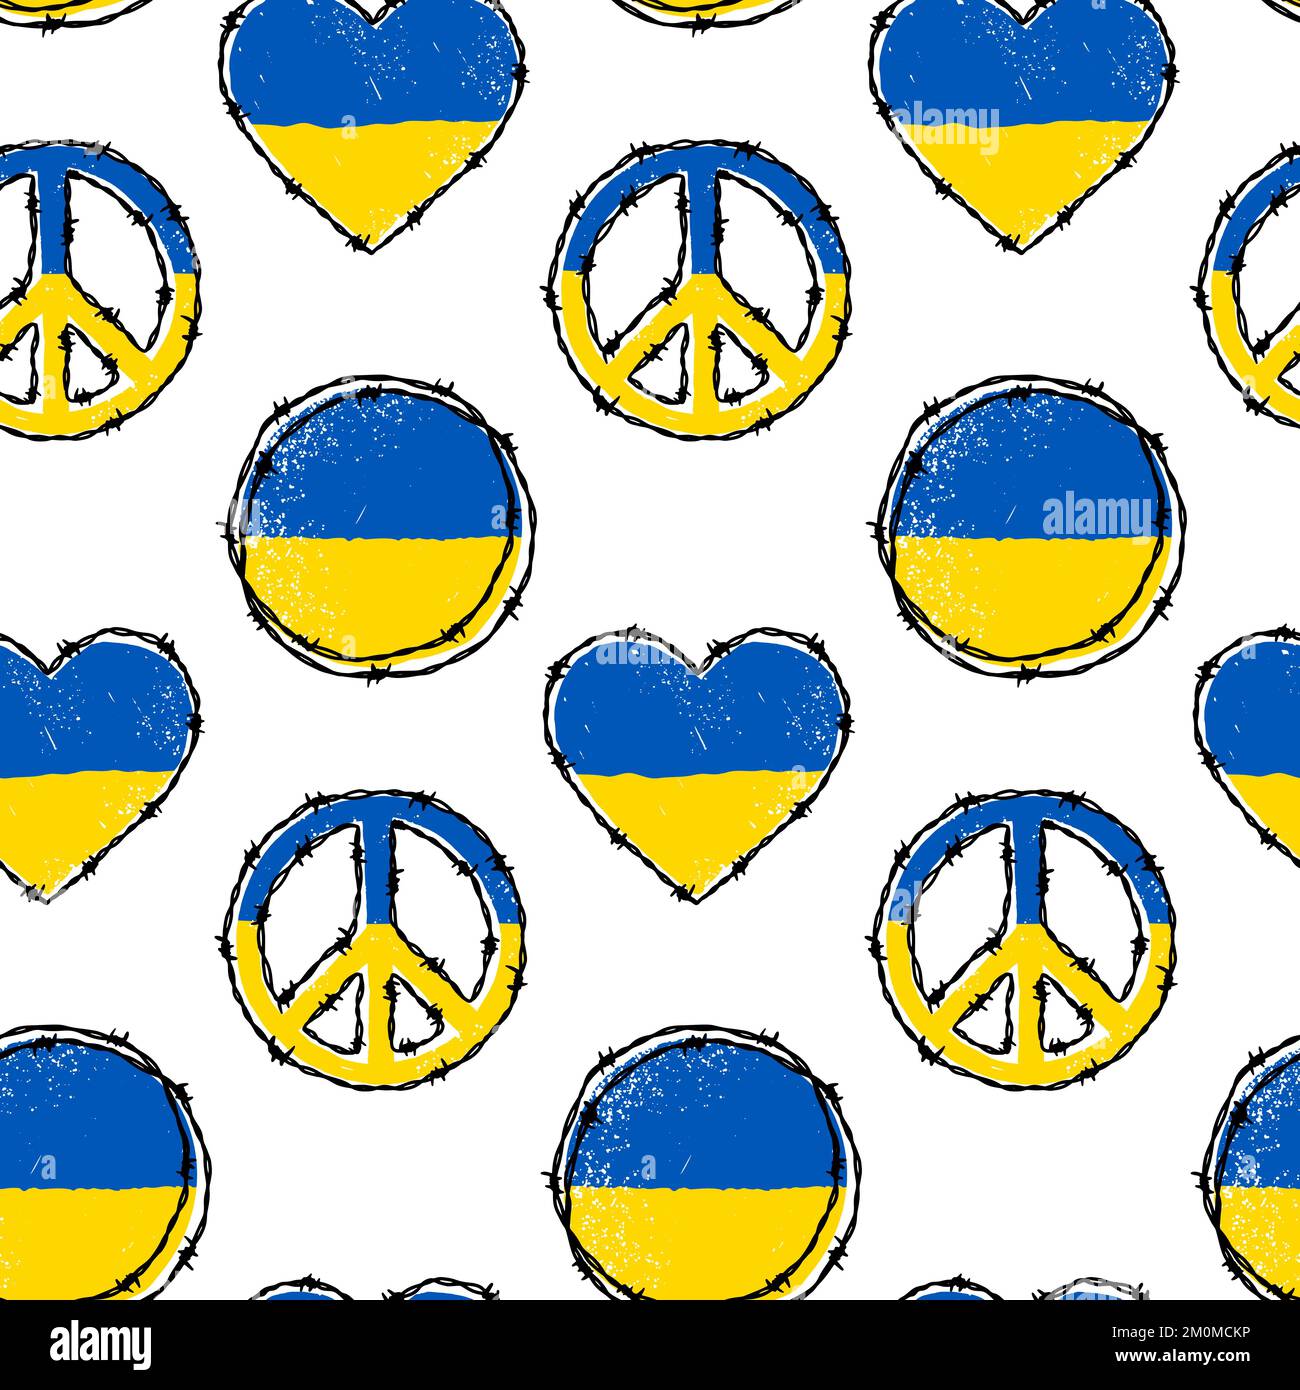 Ukraine symbols textured seamless pattern. Background in Ukrainian flag yellow and blue colors. Vector illustration Stock Vector